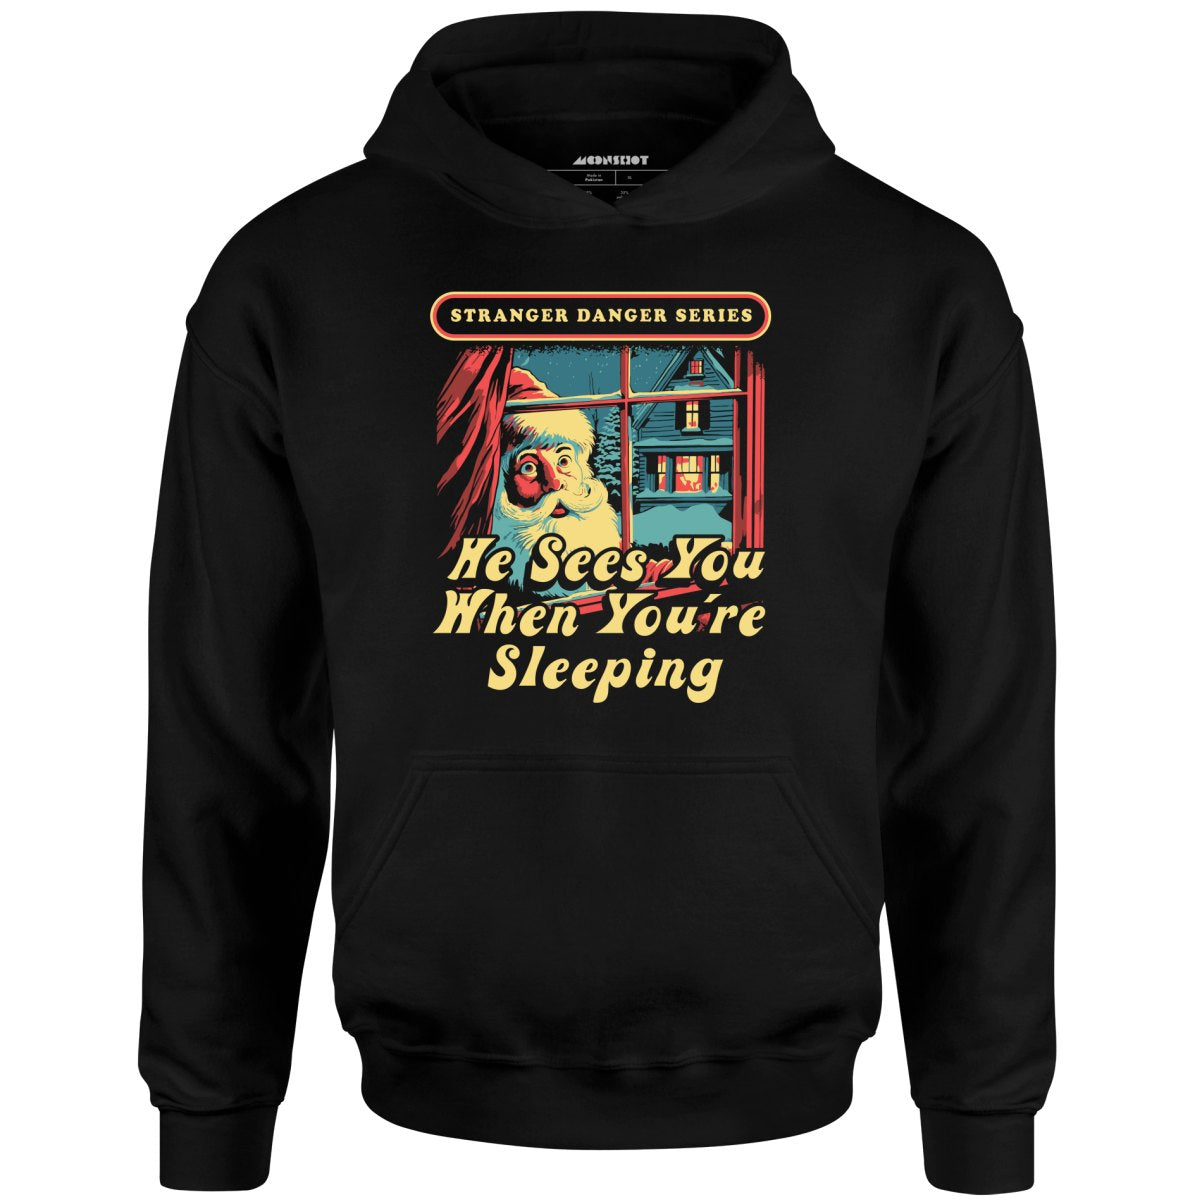 He Sees You When You're Sleeping - Unisex Hoodie